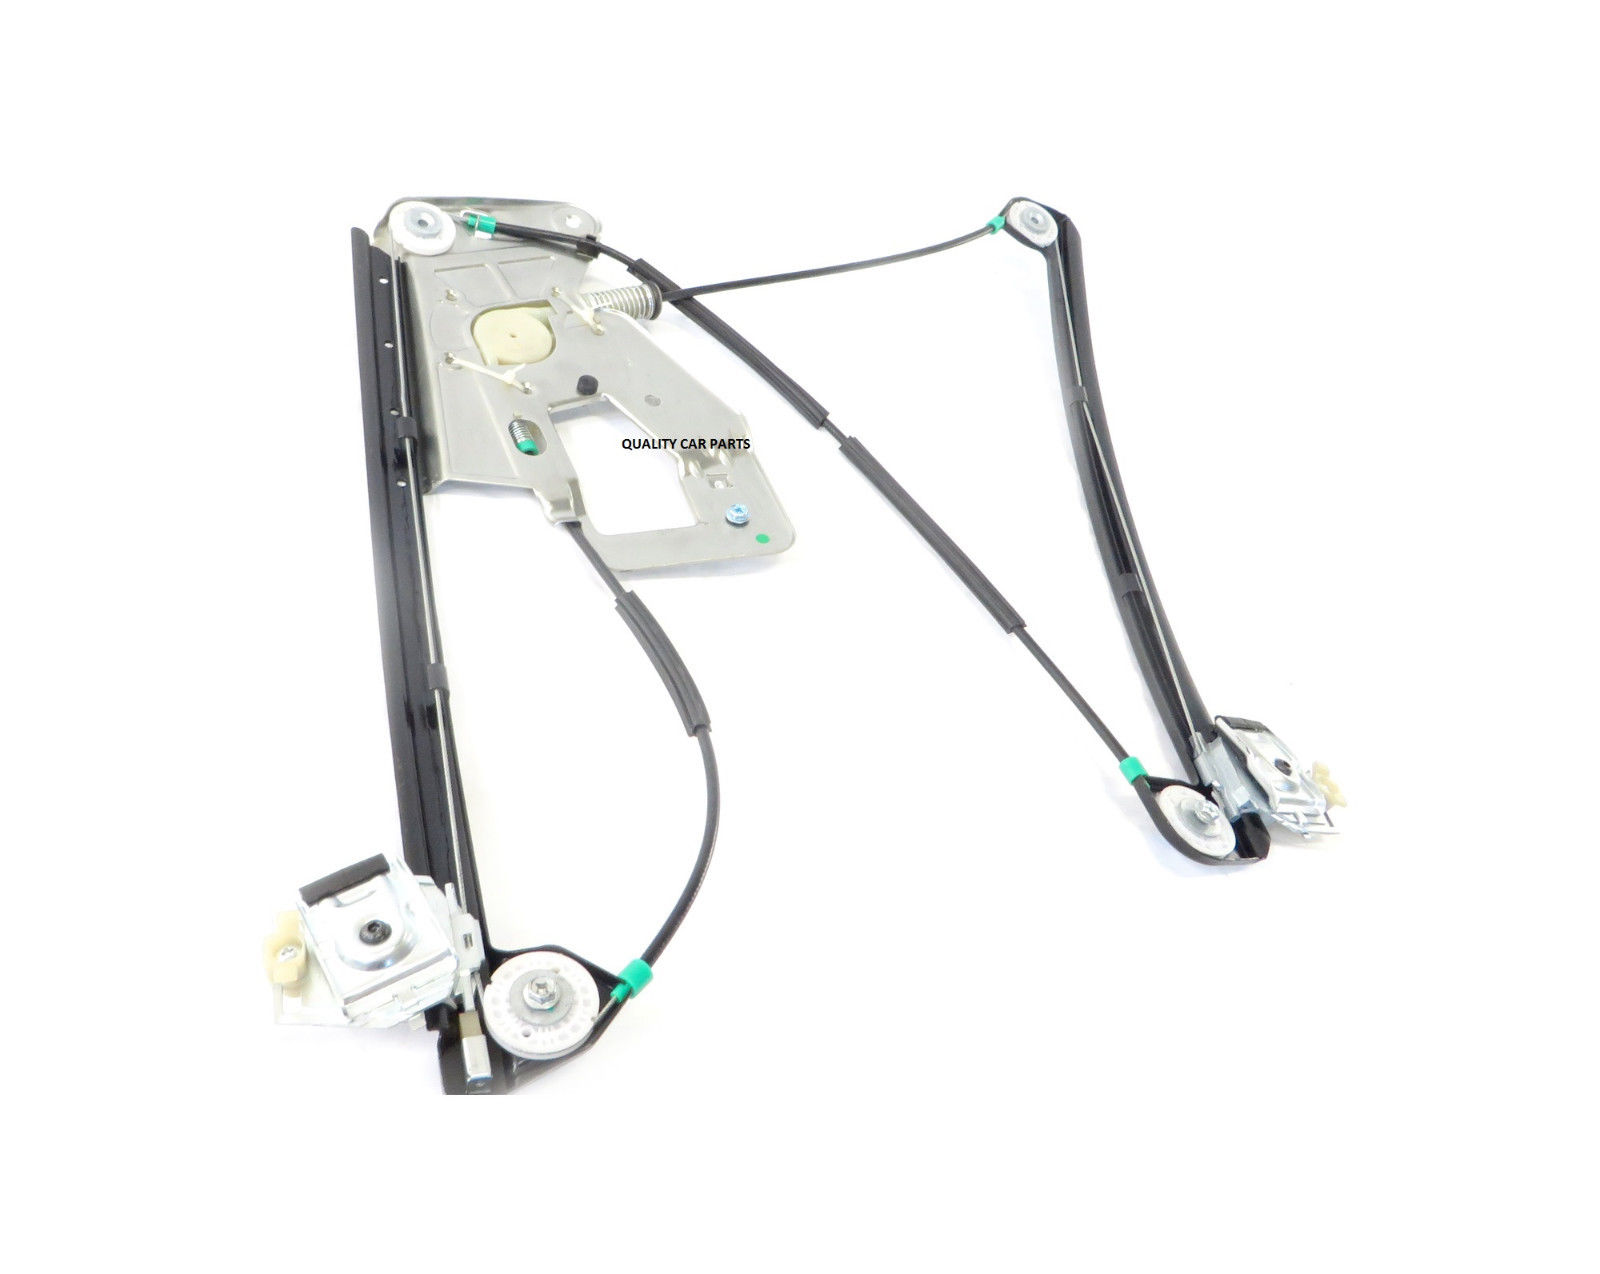 Window Regulator for BMW E39 5 series 98-03 front Right (driver) M5 NEW